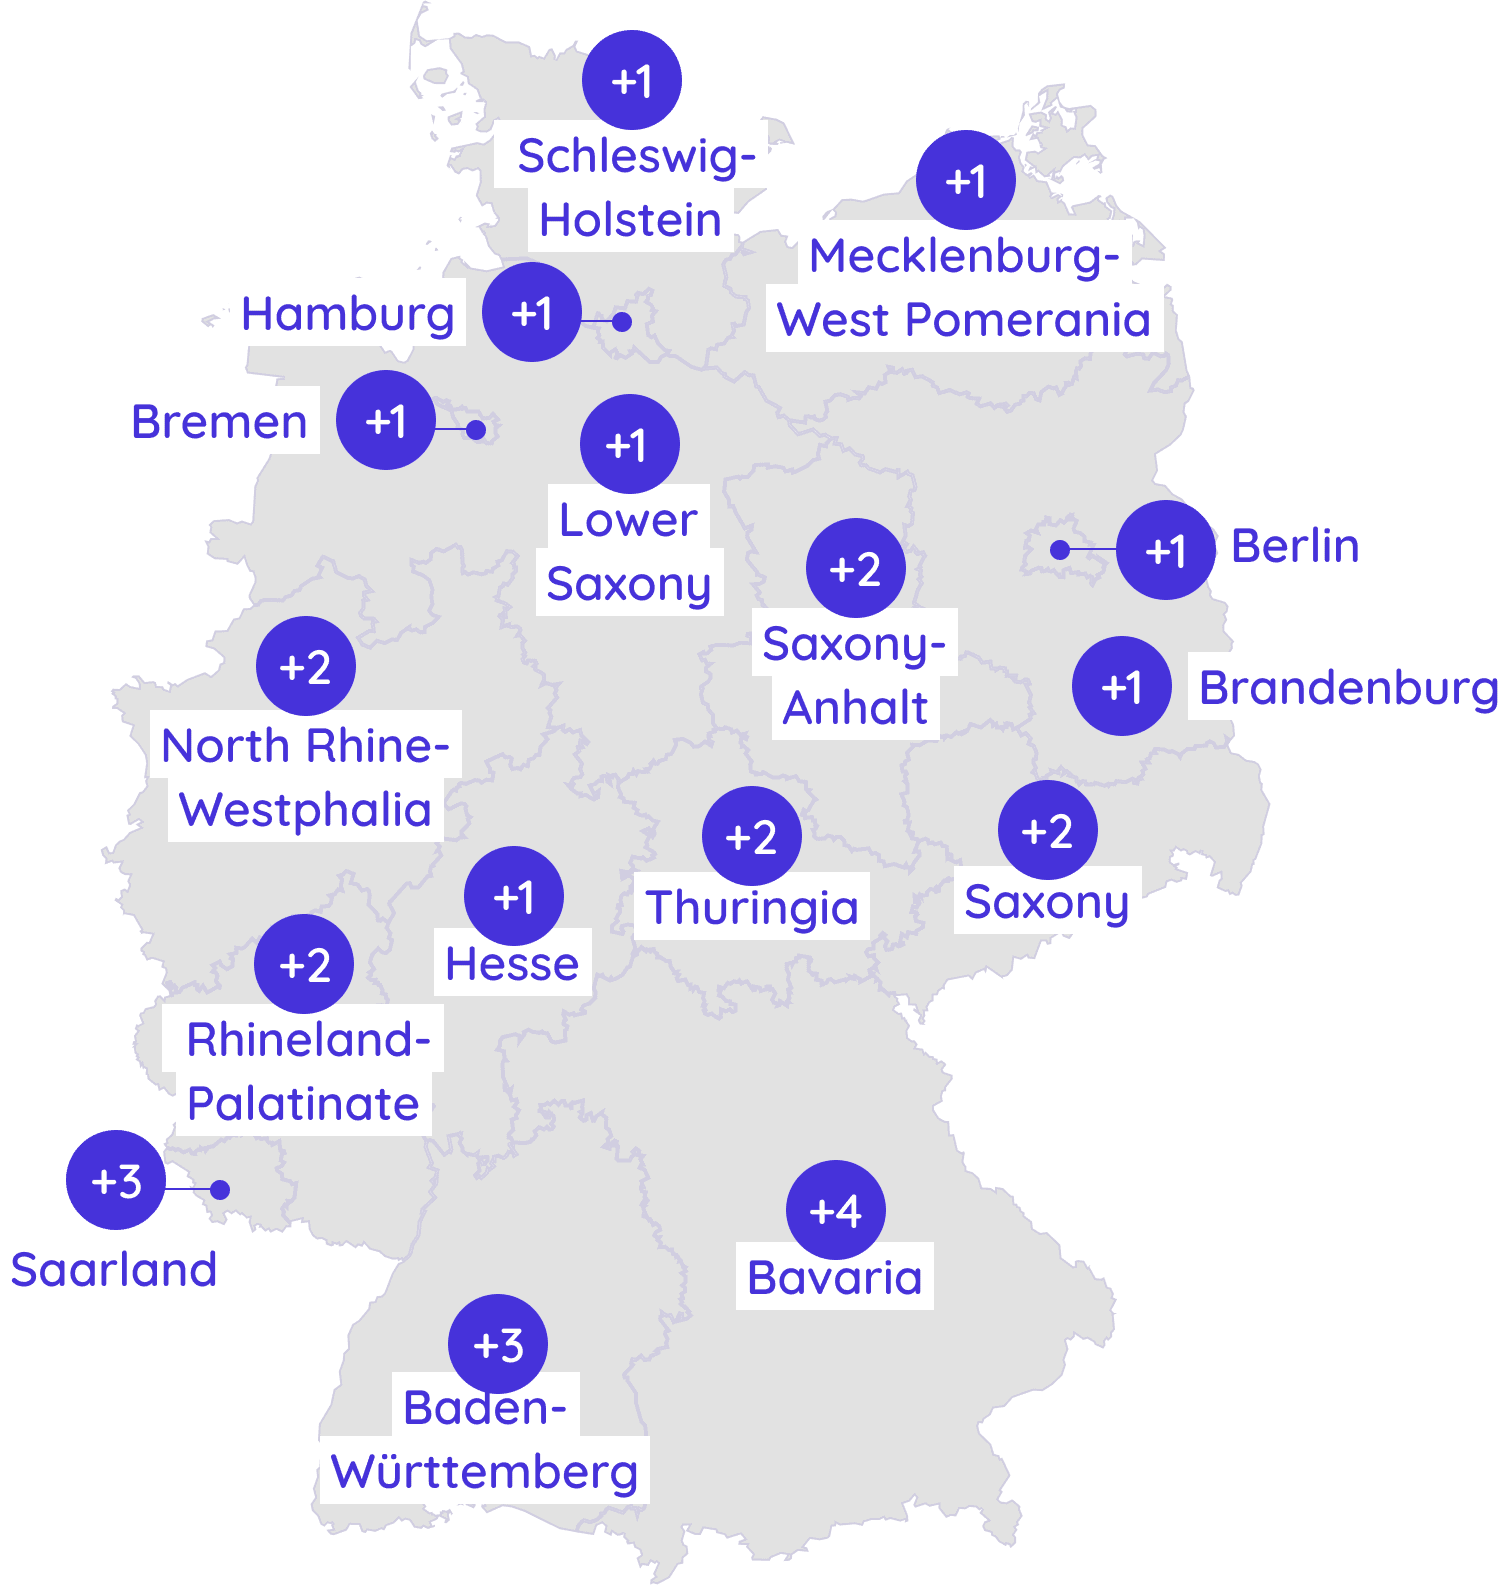 Map of German states highlighting the extra public holidays per state